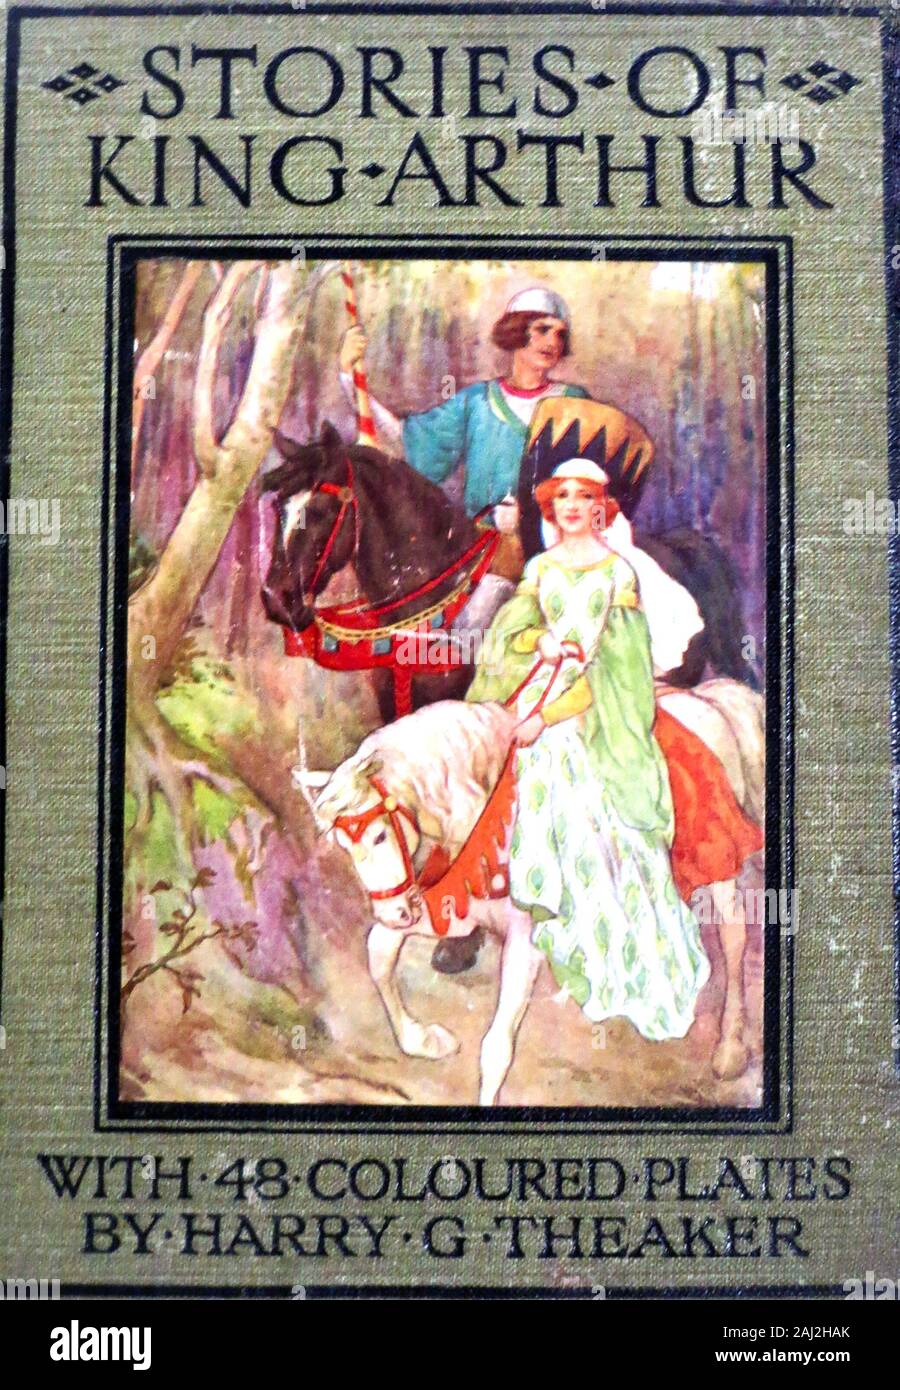 Stories Of King Arthur 1925 Book By Blanche Wilder With Illustrations By By Harry Theaker Stock Photo Alamy